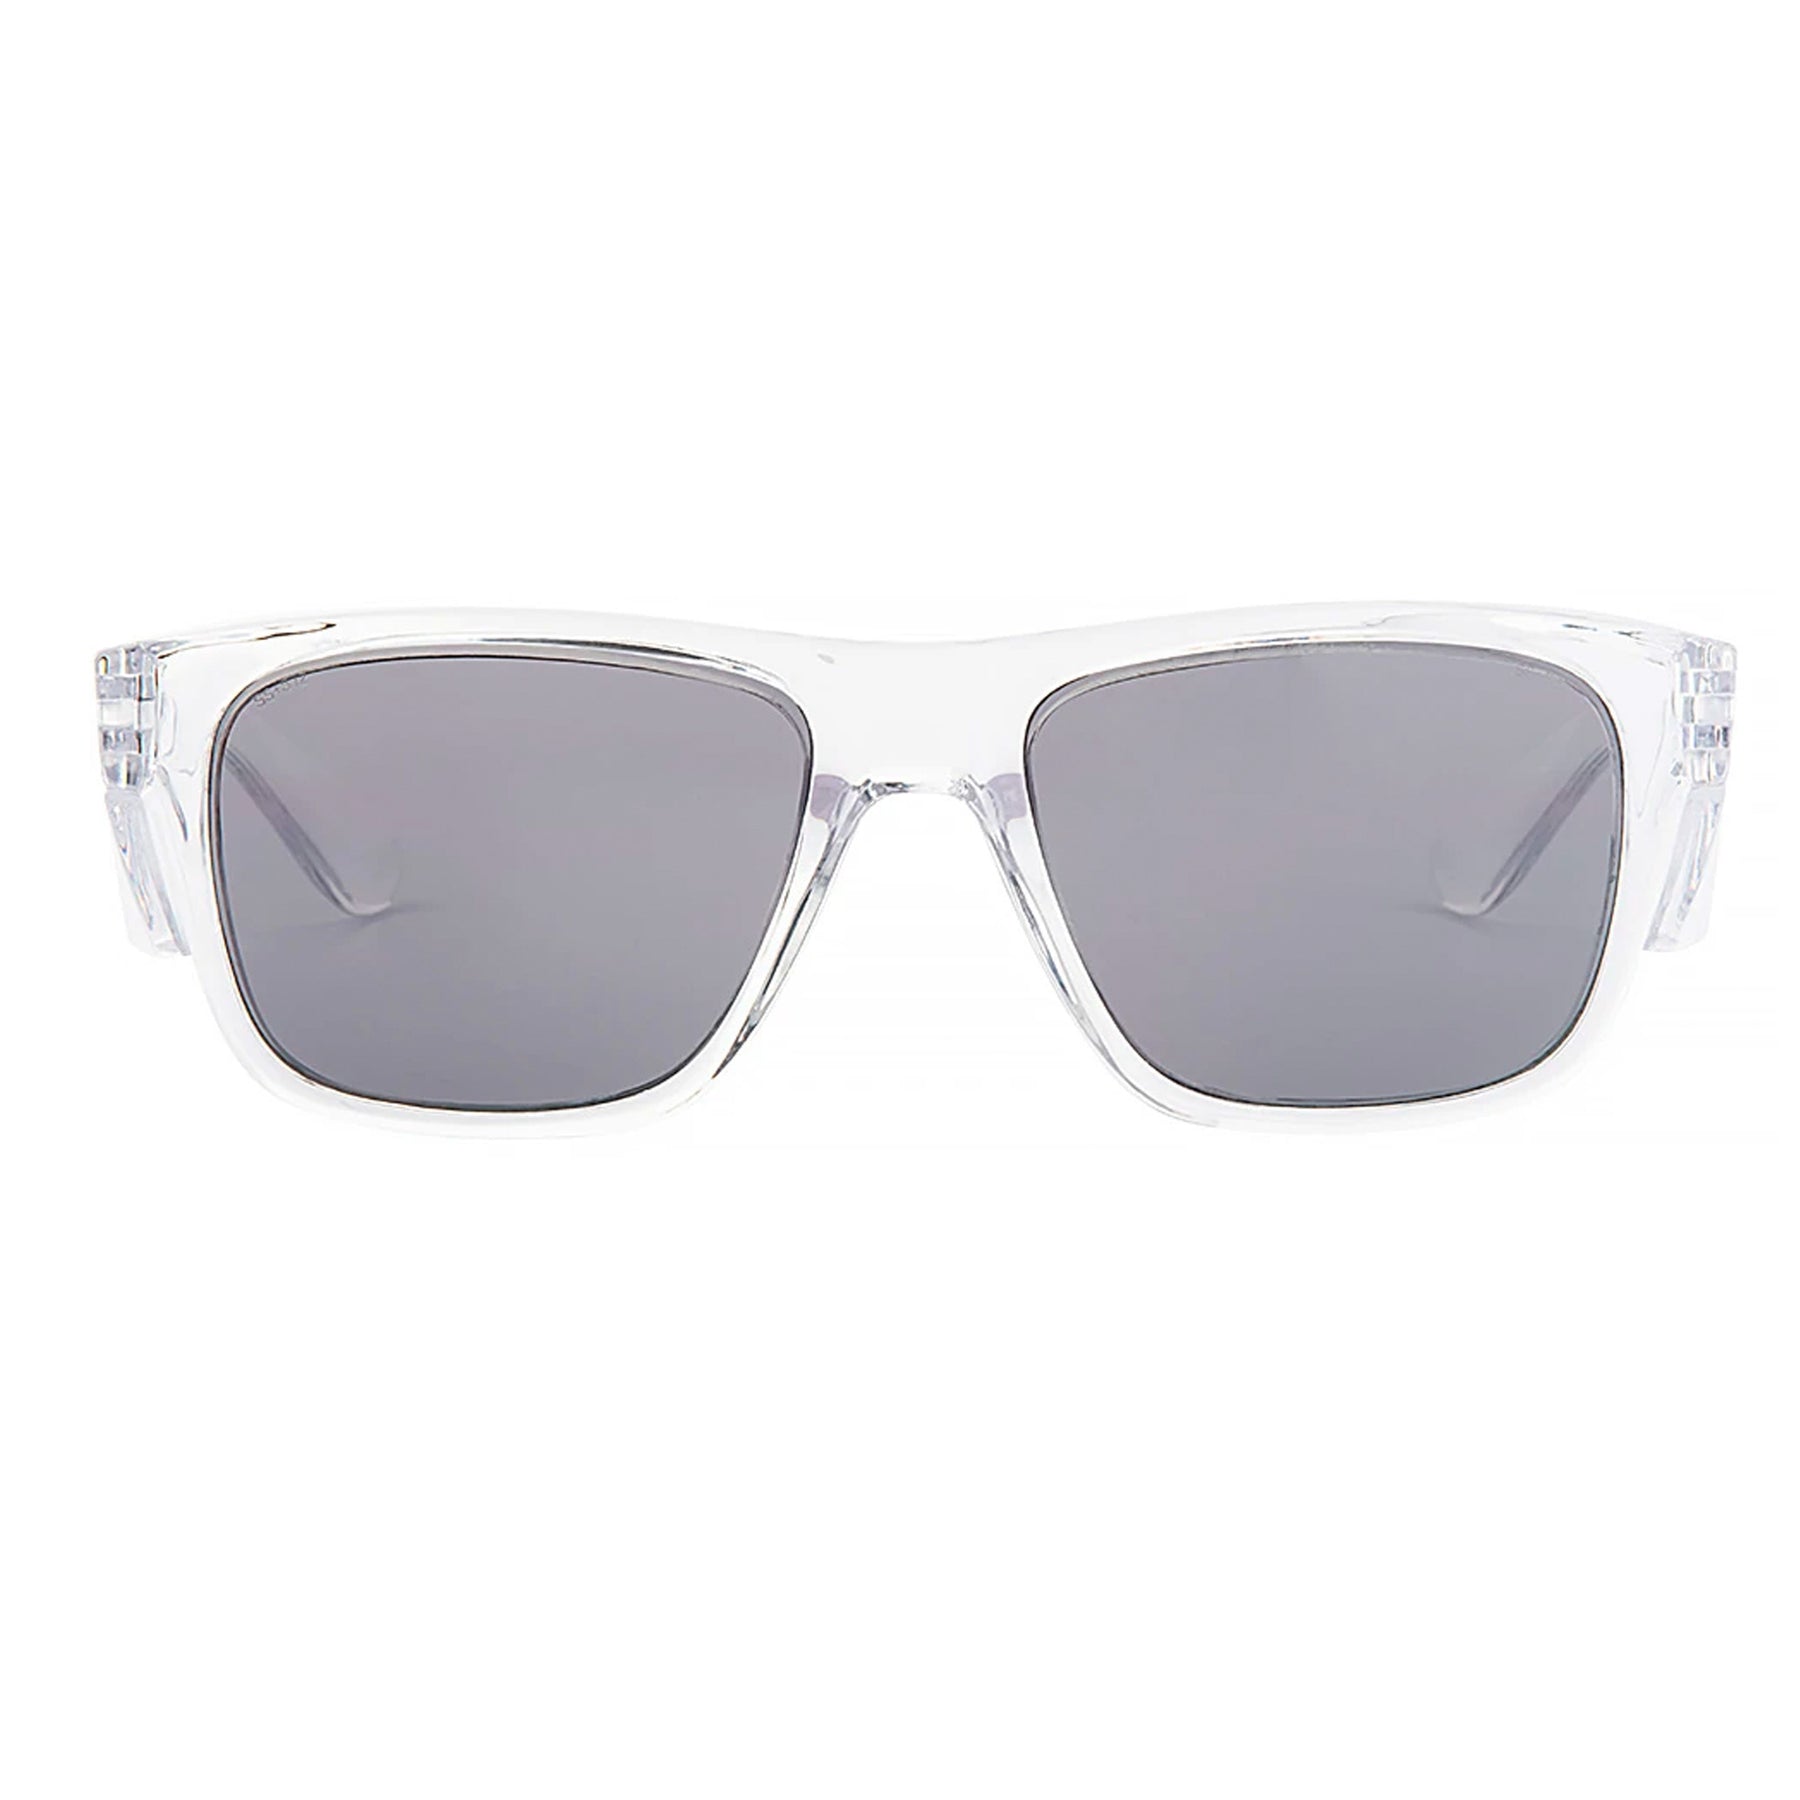 safe style fusions clear frame glasses with tinted lens